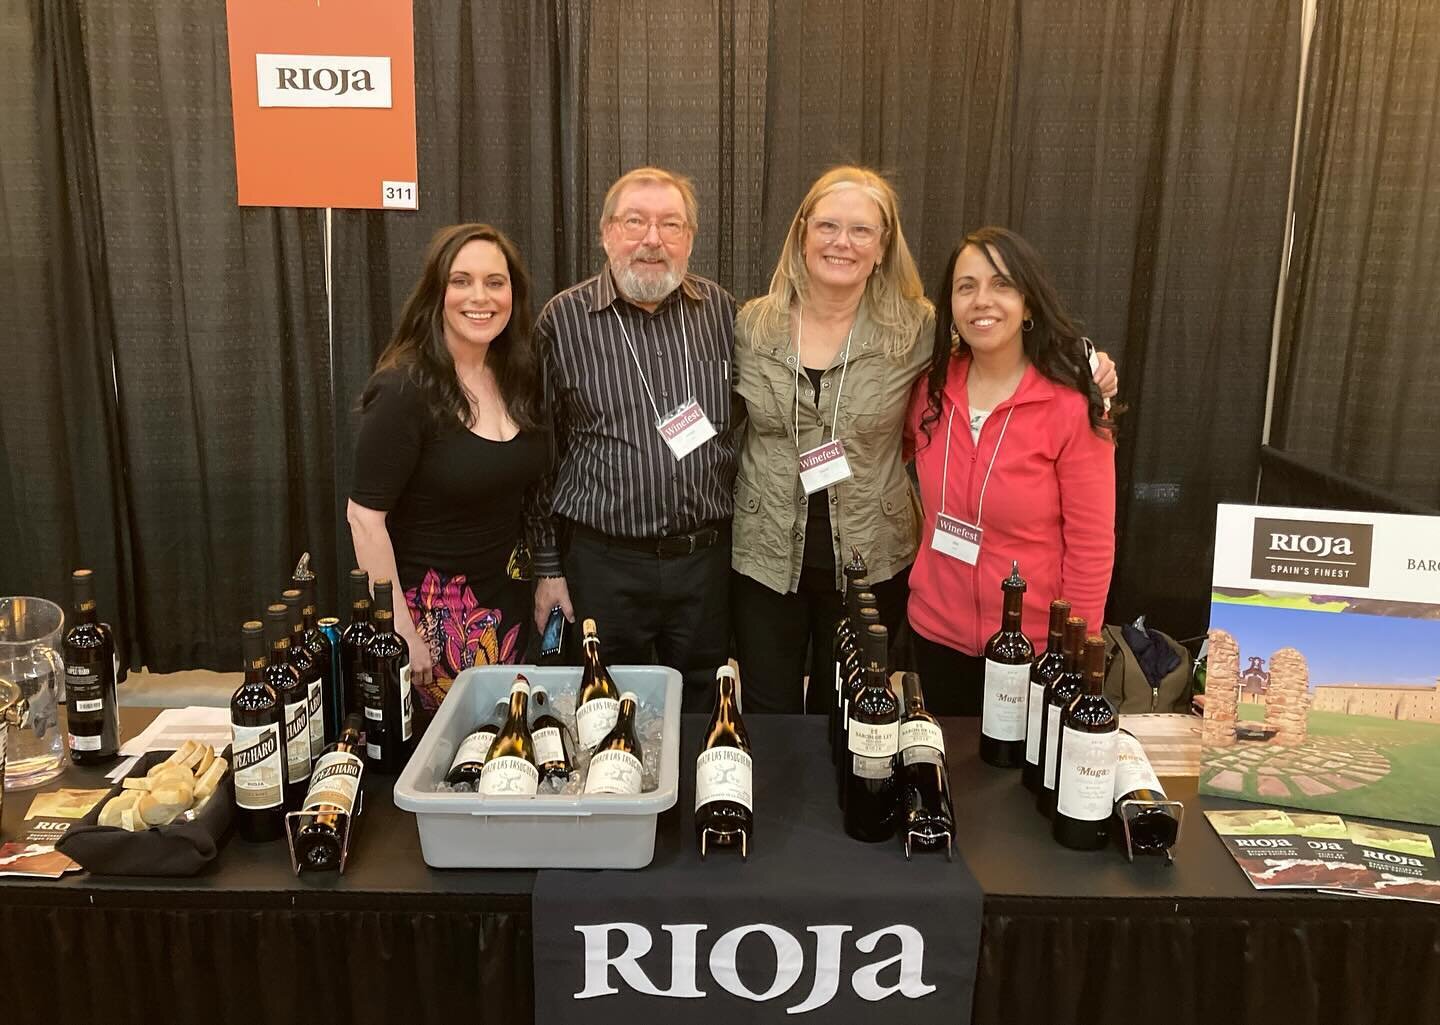 Come say hi! I have pleasure of representing @riojawine at the Calgary Winefest this weekend. Rioja is the Featured Wine Region this year. I am at booth 311 and as you can see we have some amazing wines open for tasting. Find out why Rioja is Spain&r